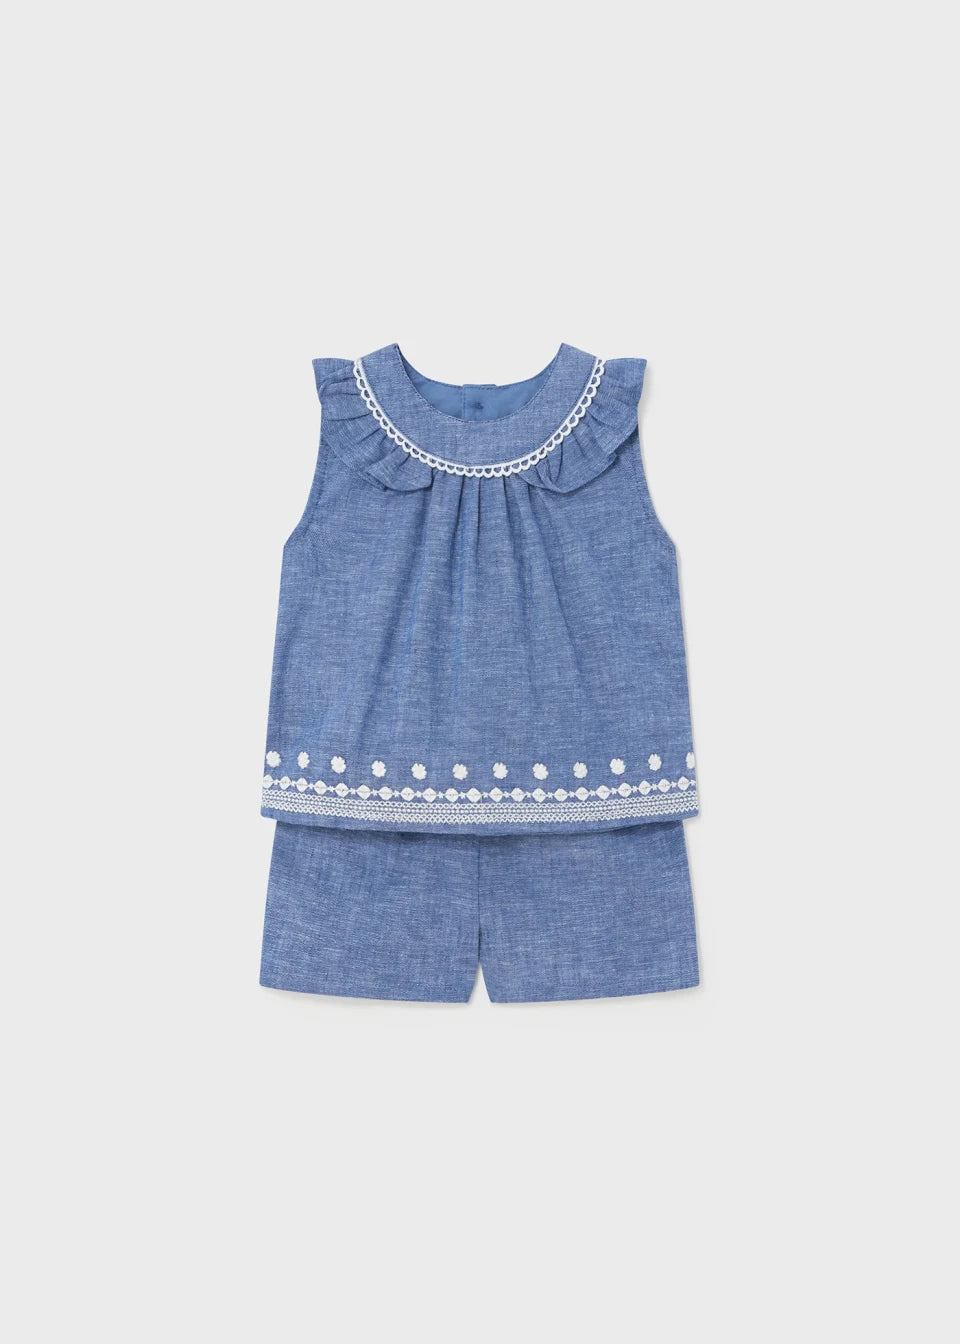 Baby embroidery blue top & shorts set